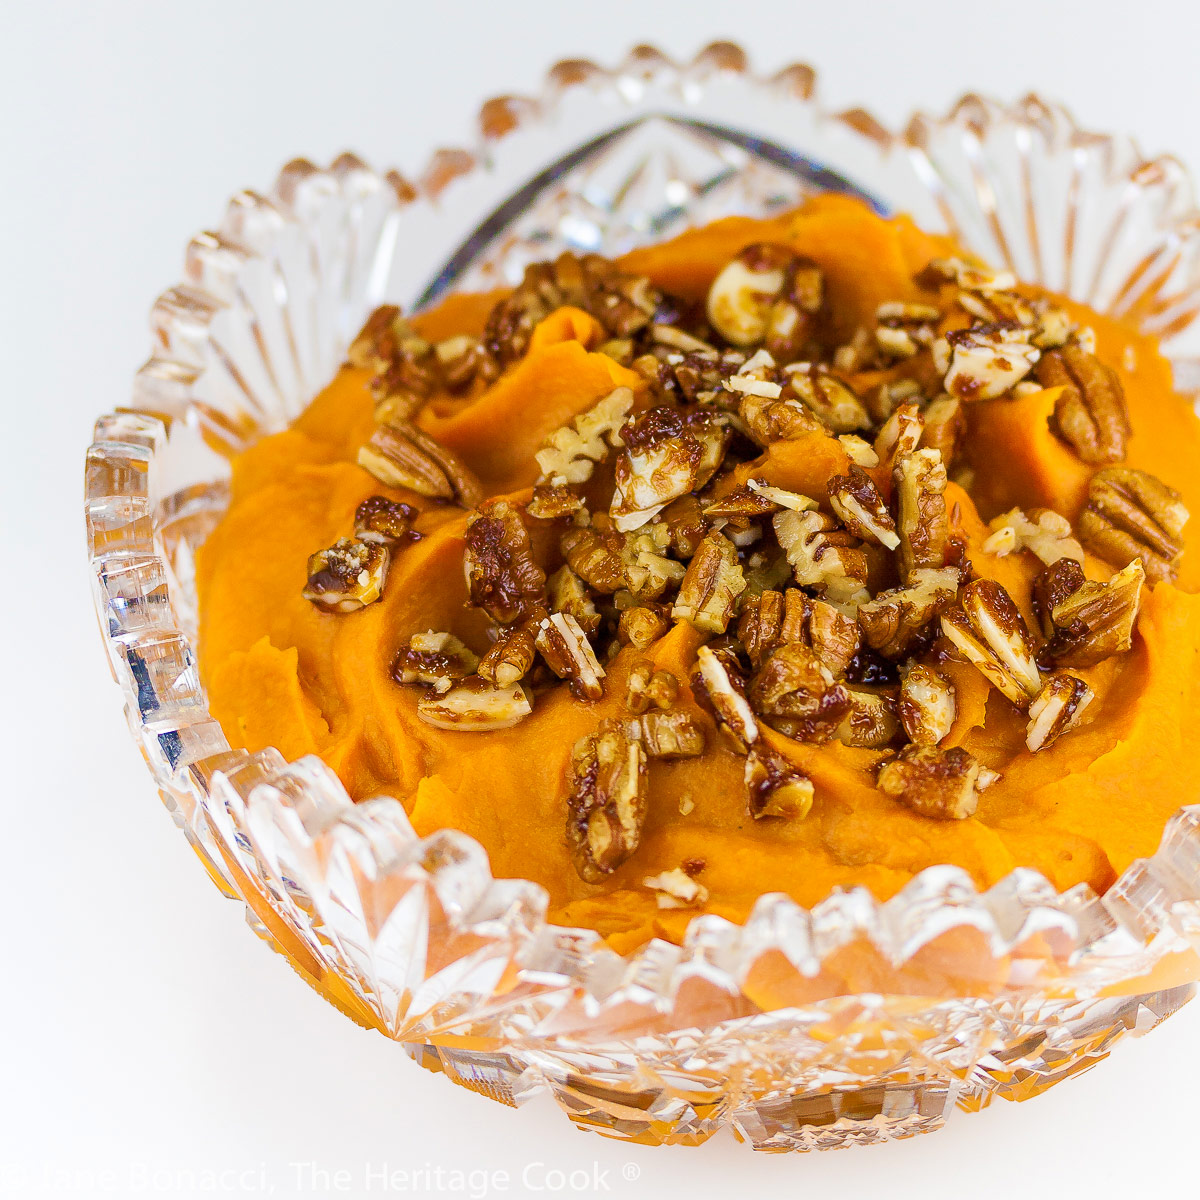 Maple whipped sweet potatoes topped with candied chopped pecans in two bowls, one cut glass; Maple Whipped Sweet Potatoes © 2022 Jane Bonacci, The Heritage Cook.